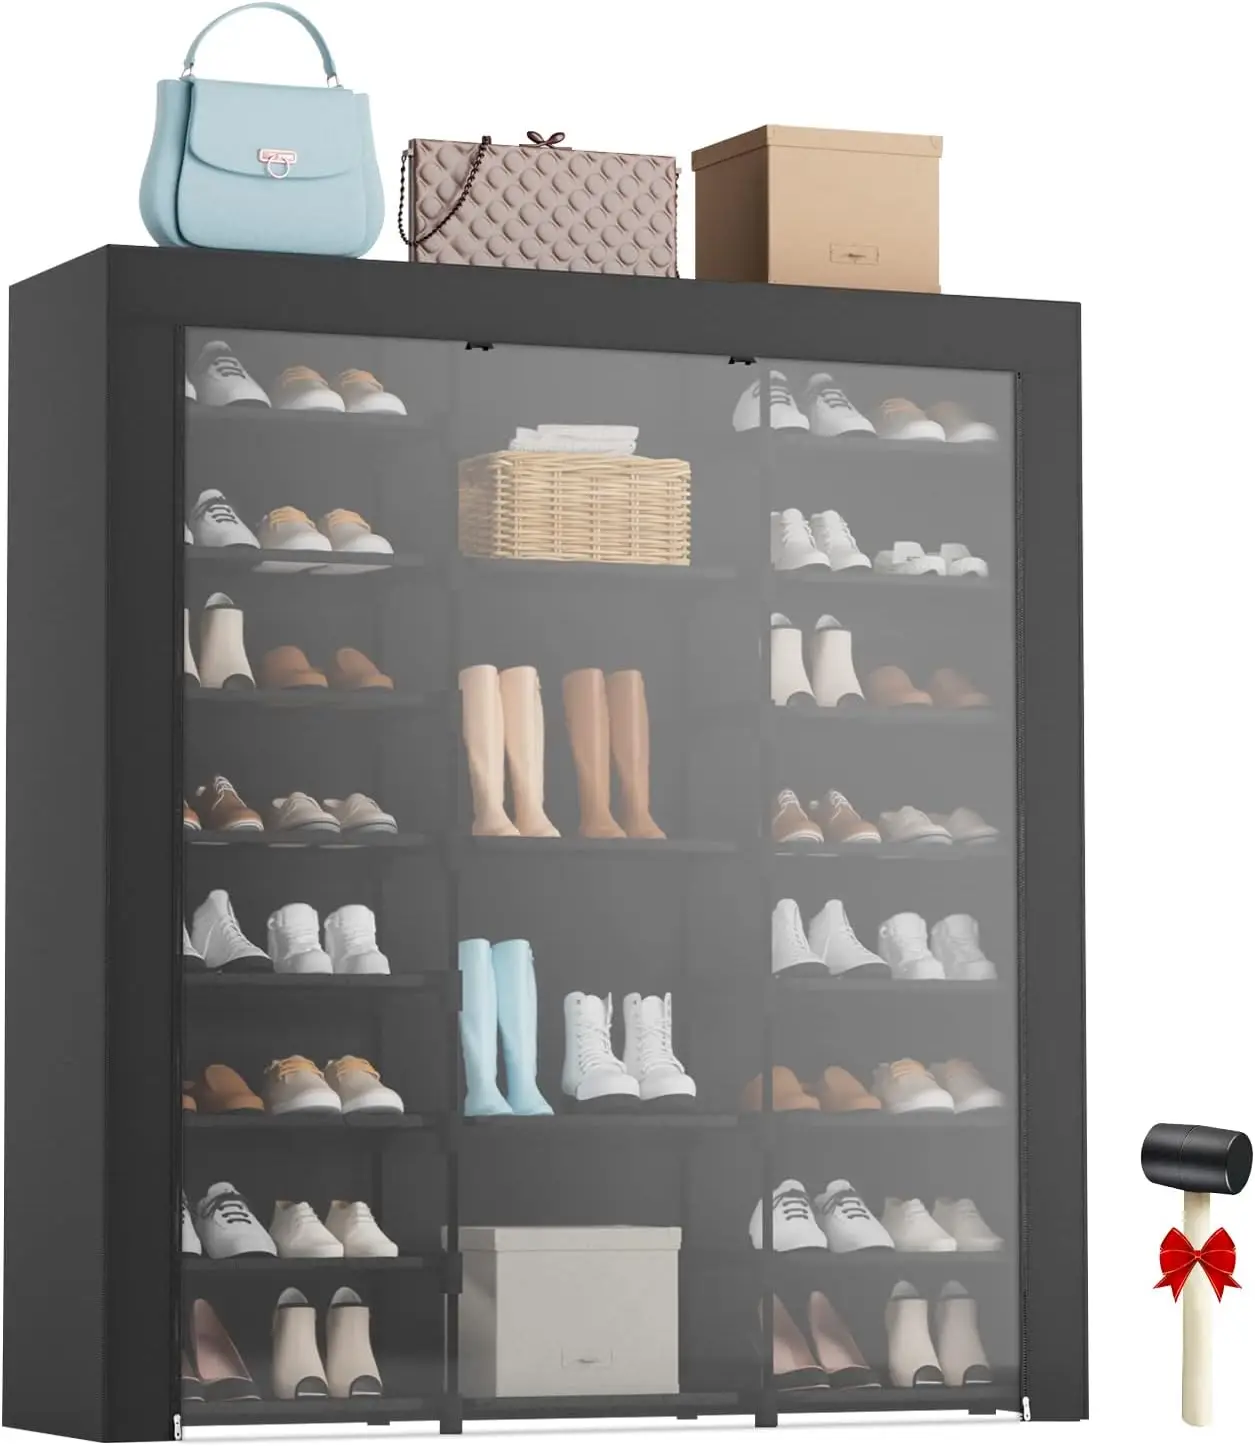 

Large Tall Shoe Rack With Covers Shoes Closet 9-Tier 40-46 Pairs, Sneaker Organizer Cabinet Closed Shoe Shelves Shoe Stand